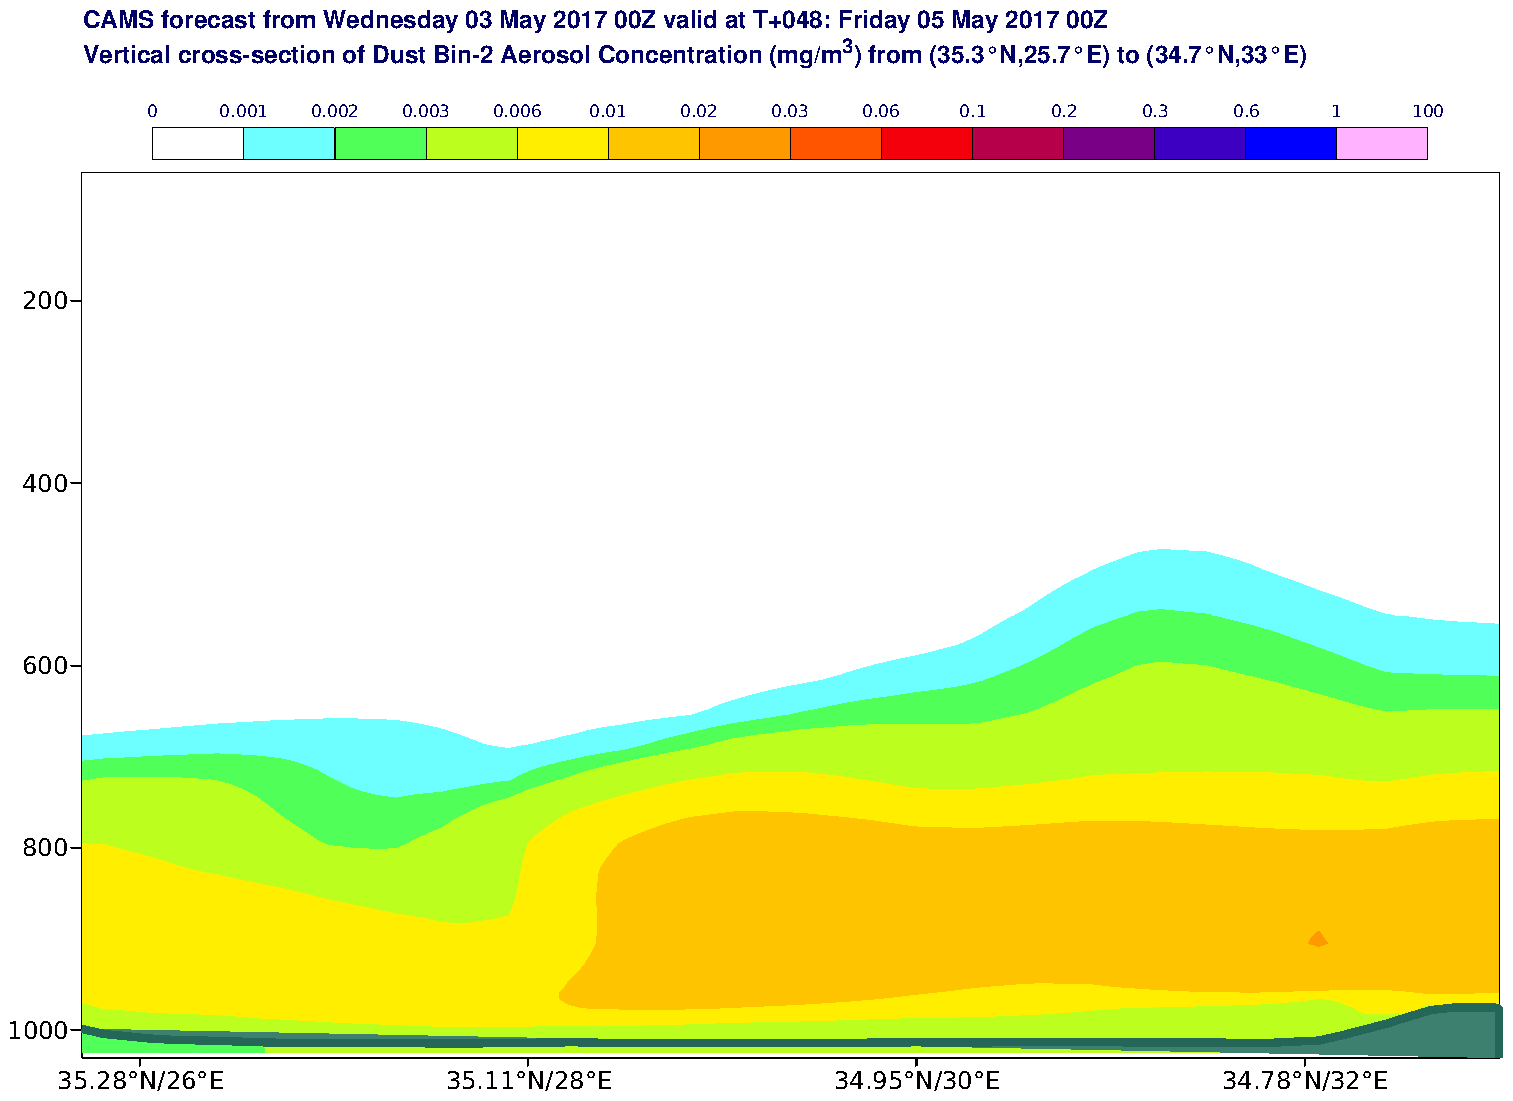 Vertical cross-section of Dust Bin-2 Aerosol Concentration (mg/m3) valid at T48 - 2017-05-05 00:00